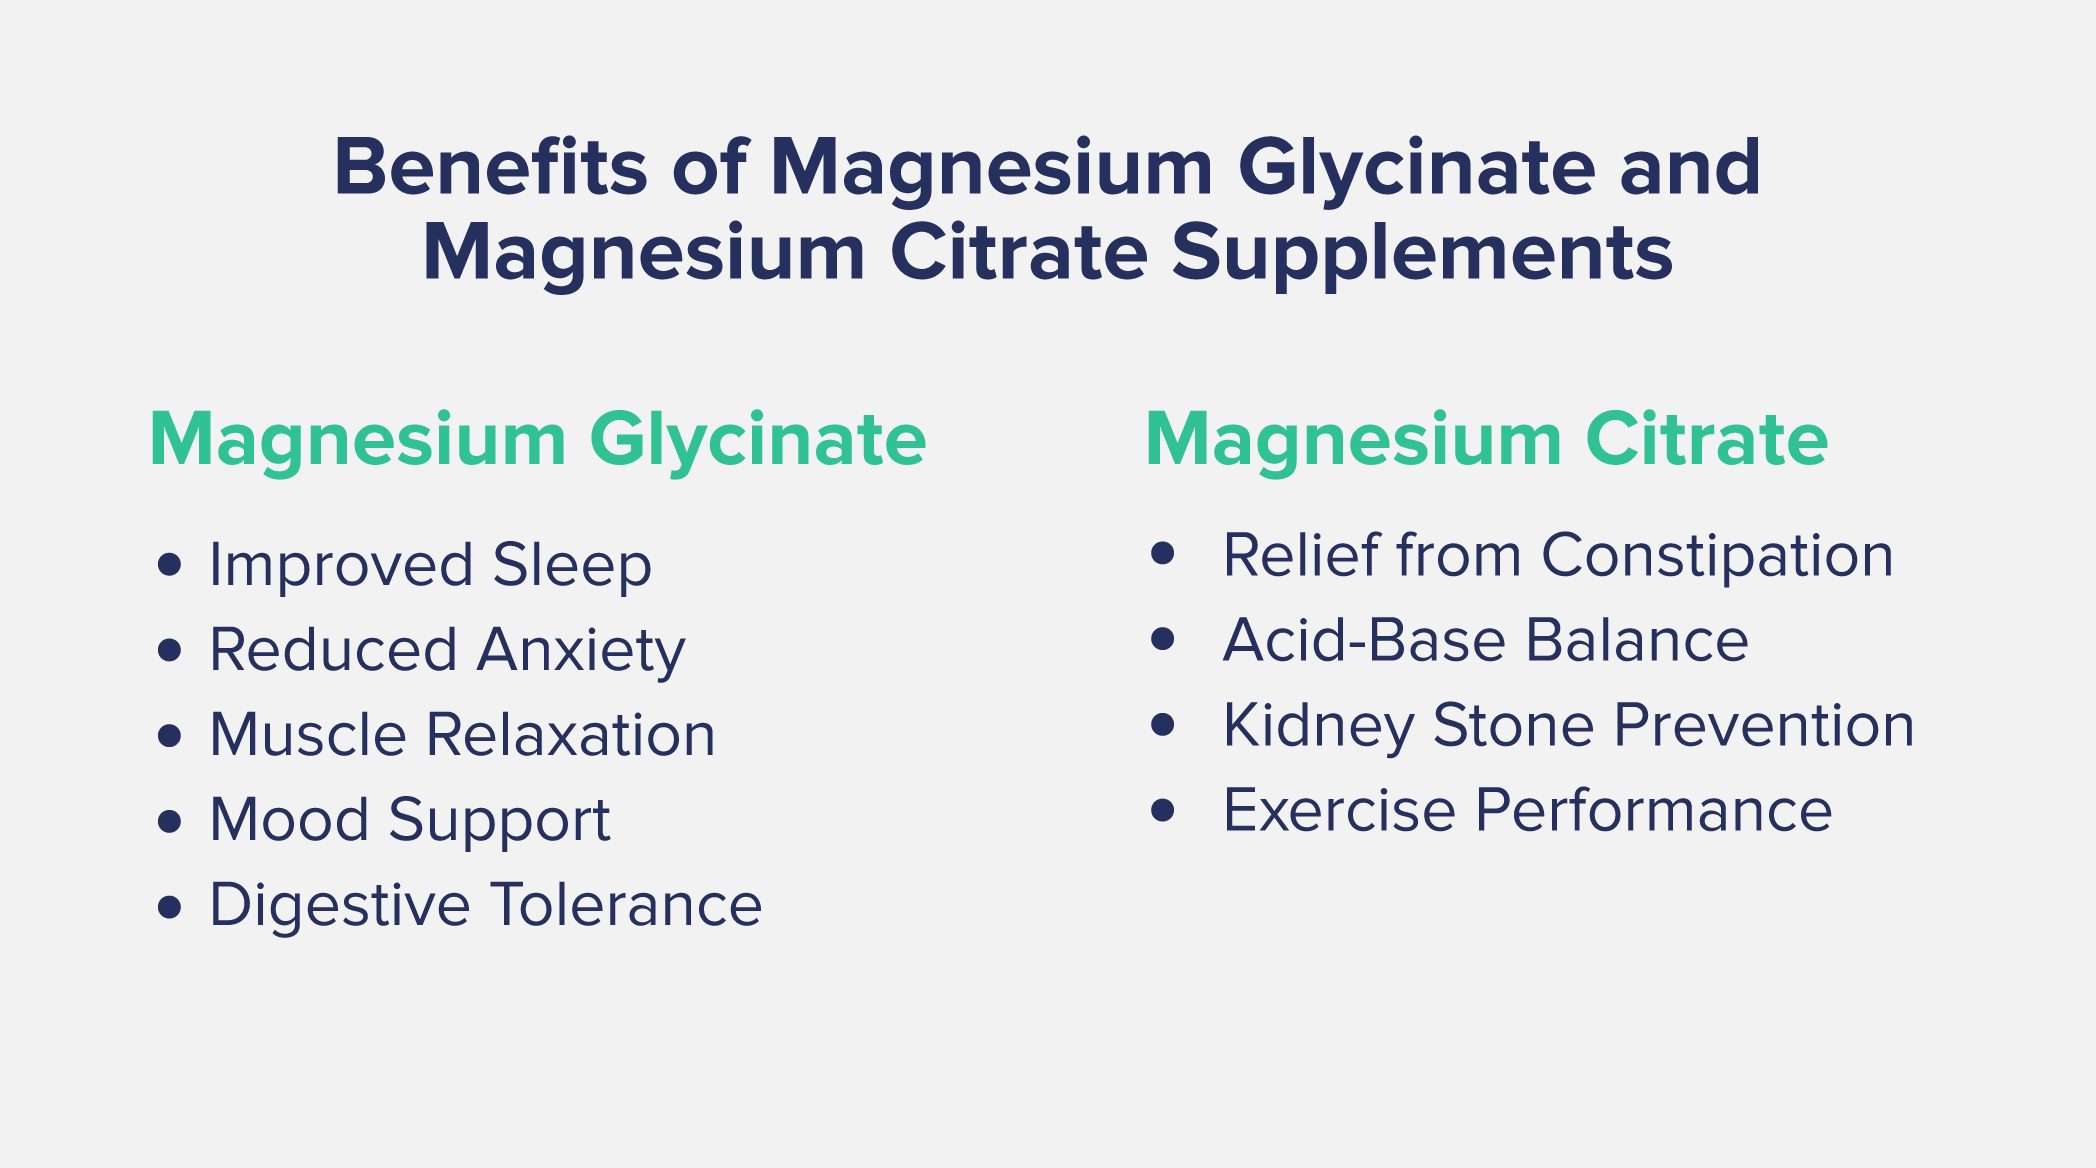 A graphic entitled "Benefits of Magnesium Glycinate vs Citrate" showing a bulleted list of benefits for each form of magnesium